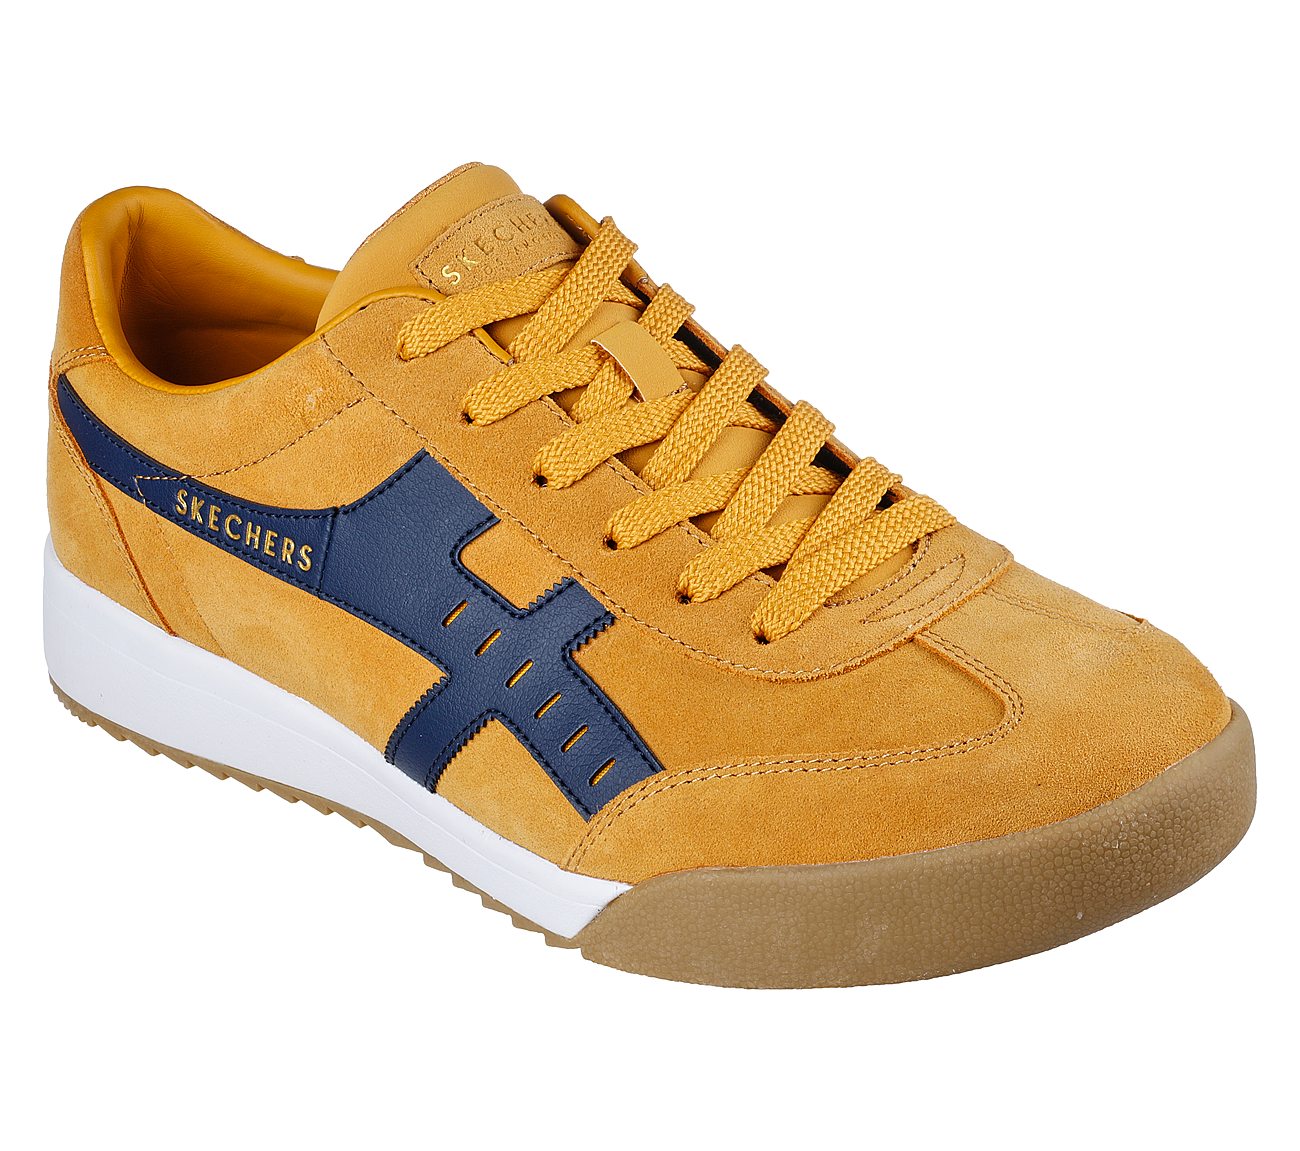 ZINGER - MANCHEGO, GOLD Footwear Lateral View